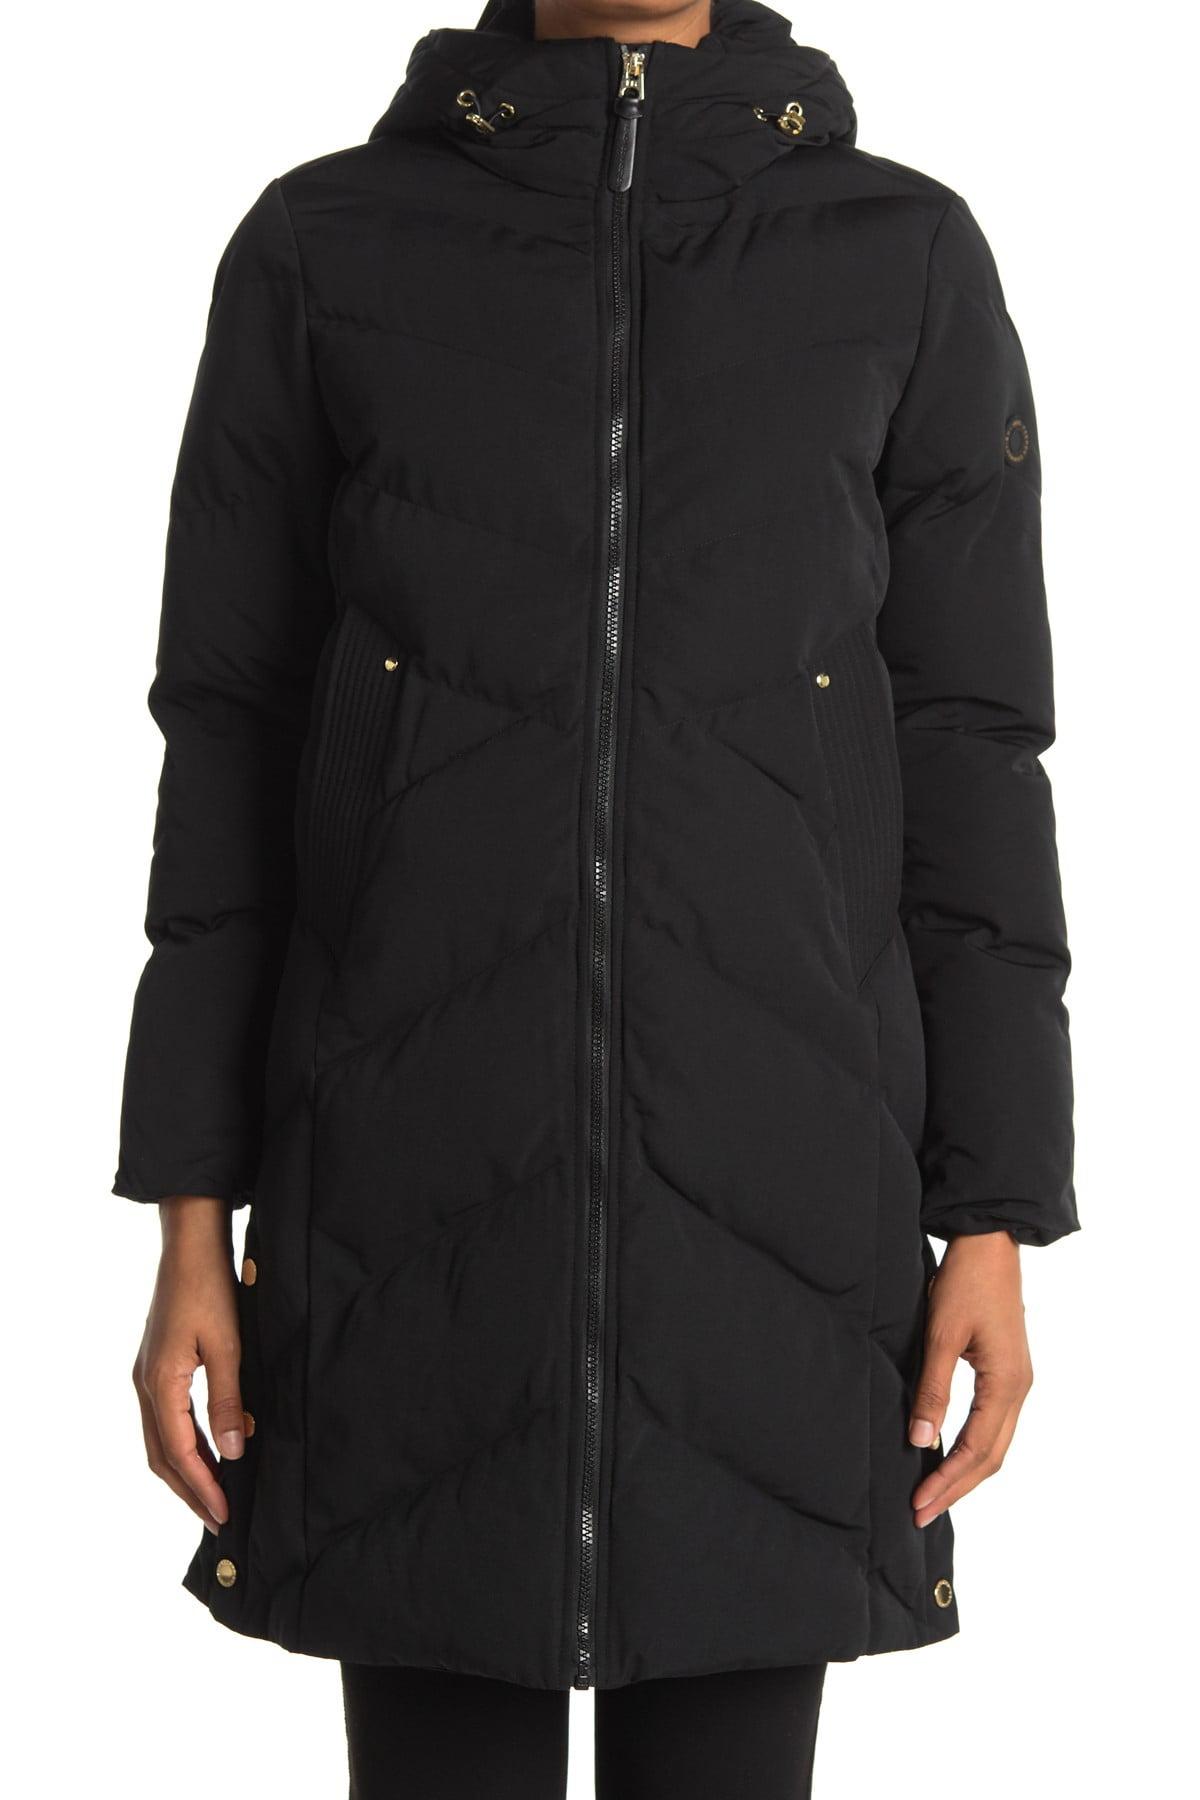 French Connection Synthetic Hooded Long Puffer Jacket in Black - Lyst